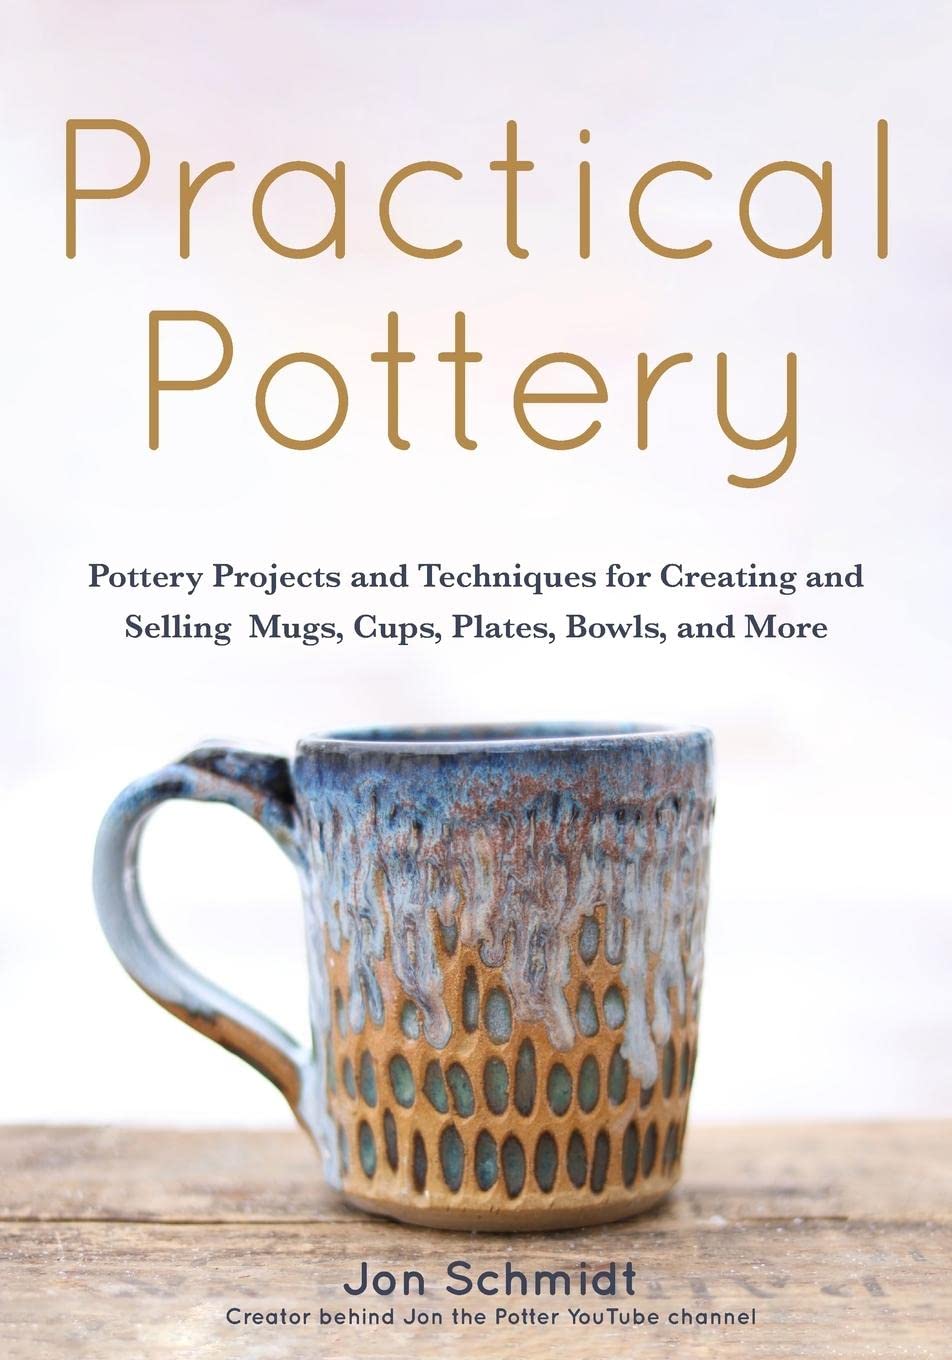 Practical Pottery: 40 Pottery Projects for Creating and Selling Mugs, Cups, Plates, Bowls, and More (Pottery & Ceramics Sculpting Techniques)